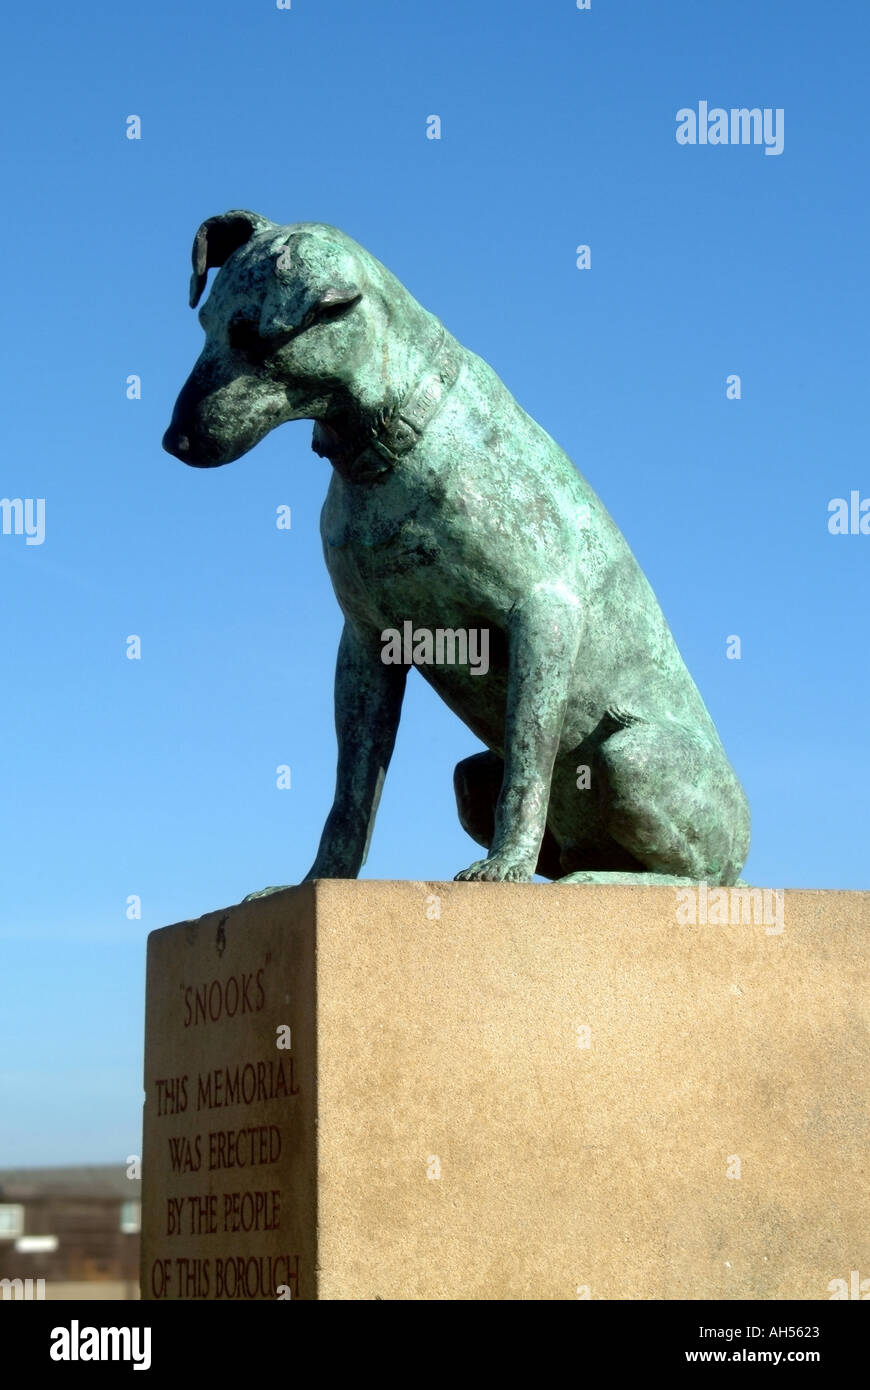 Aldeburgh statue of a dog called Snooks once stolen from its seafront location and now replaced Stock Photo